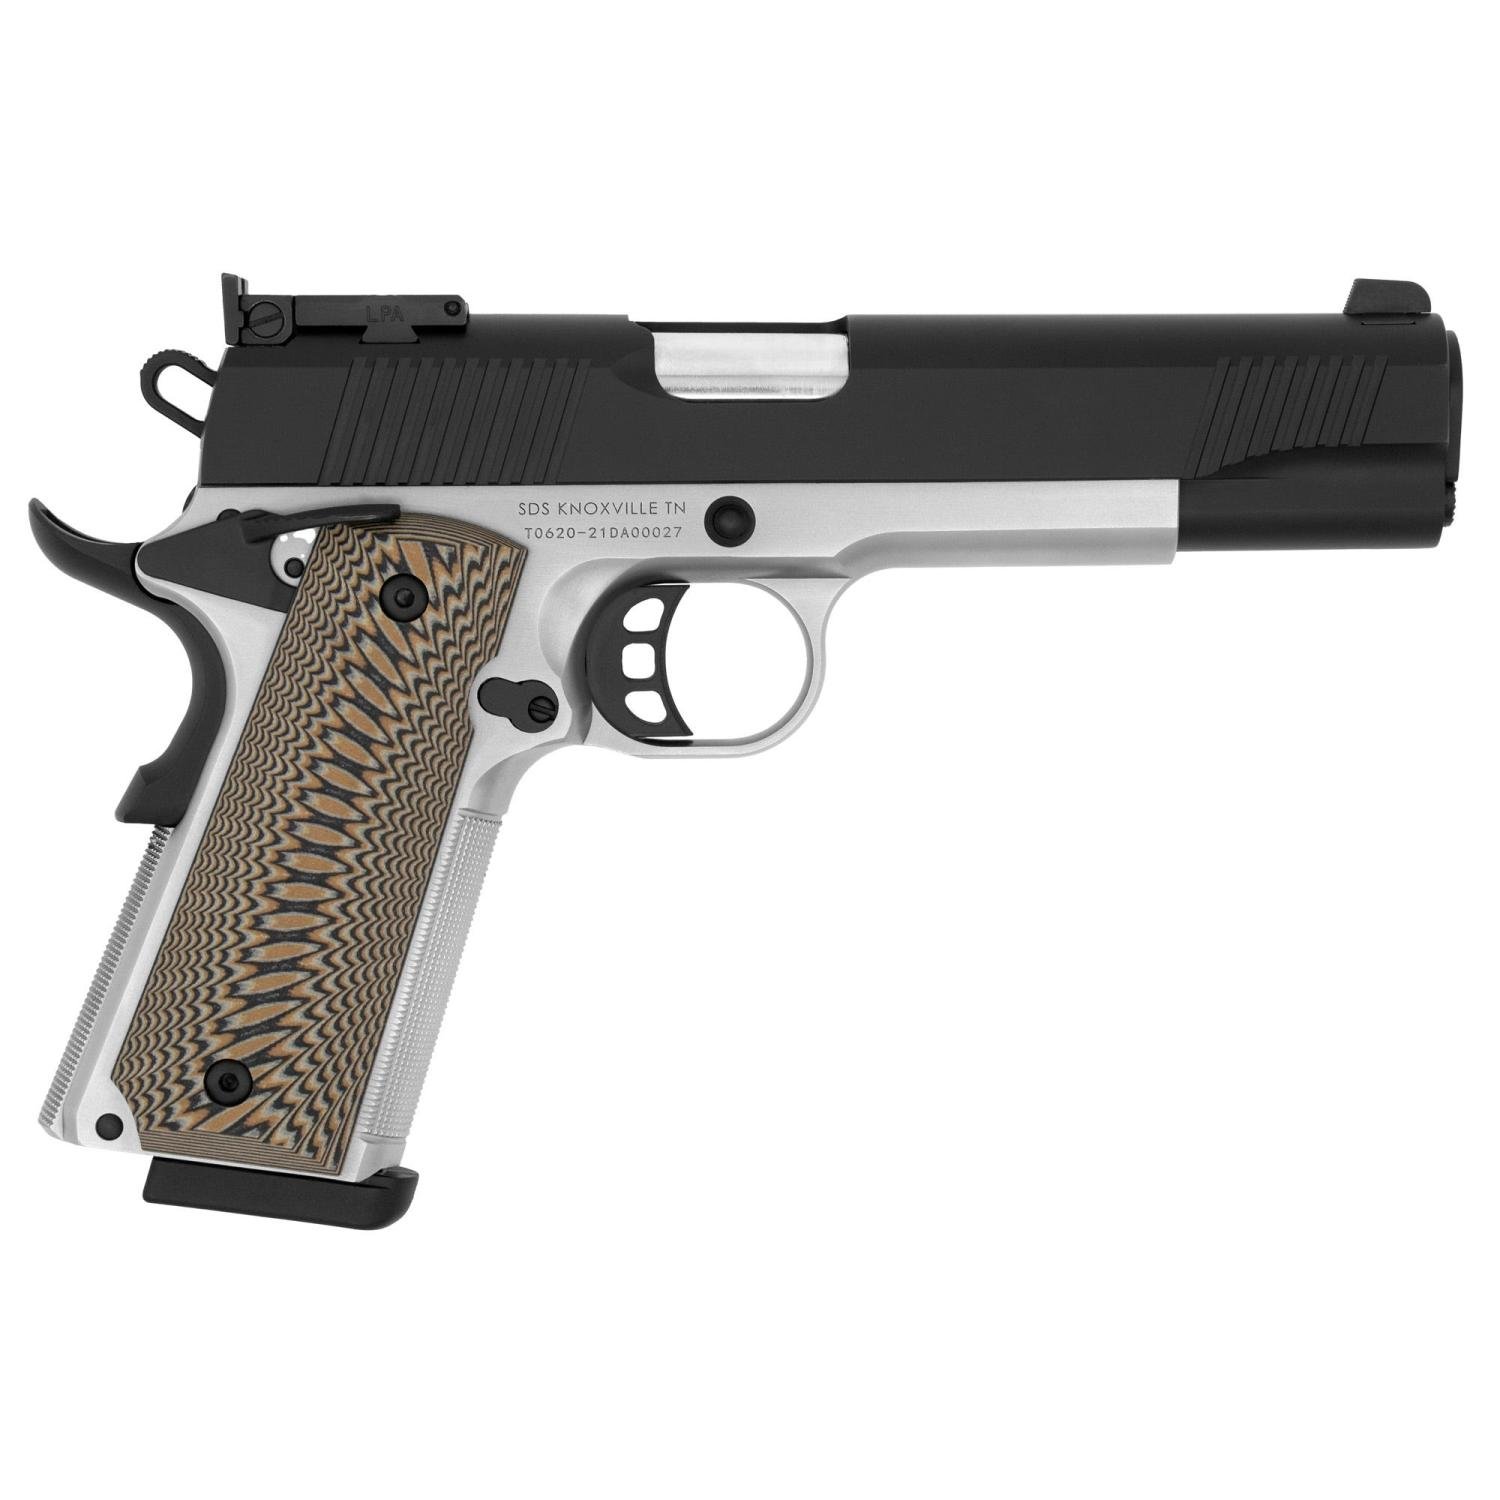 SDS Imports 1911 D10 Silver 10mm 5" Barrel 8-Rounds Adjustable Sight - $719.99 ($7.99 S/H on Firearms)